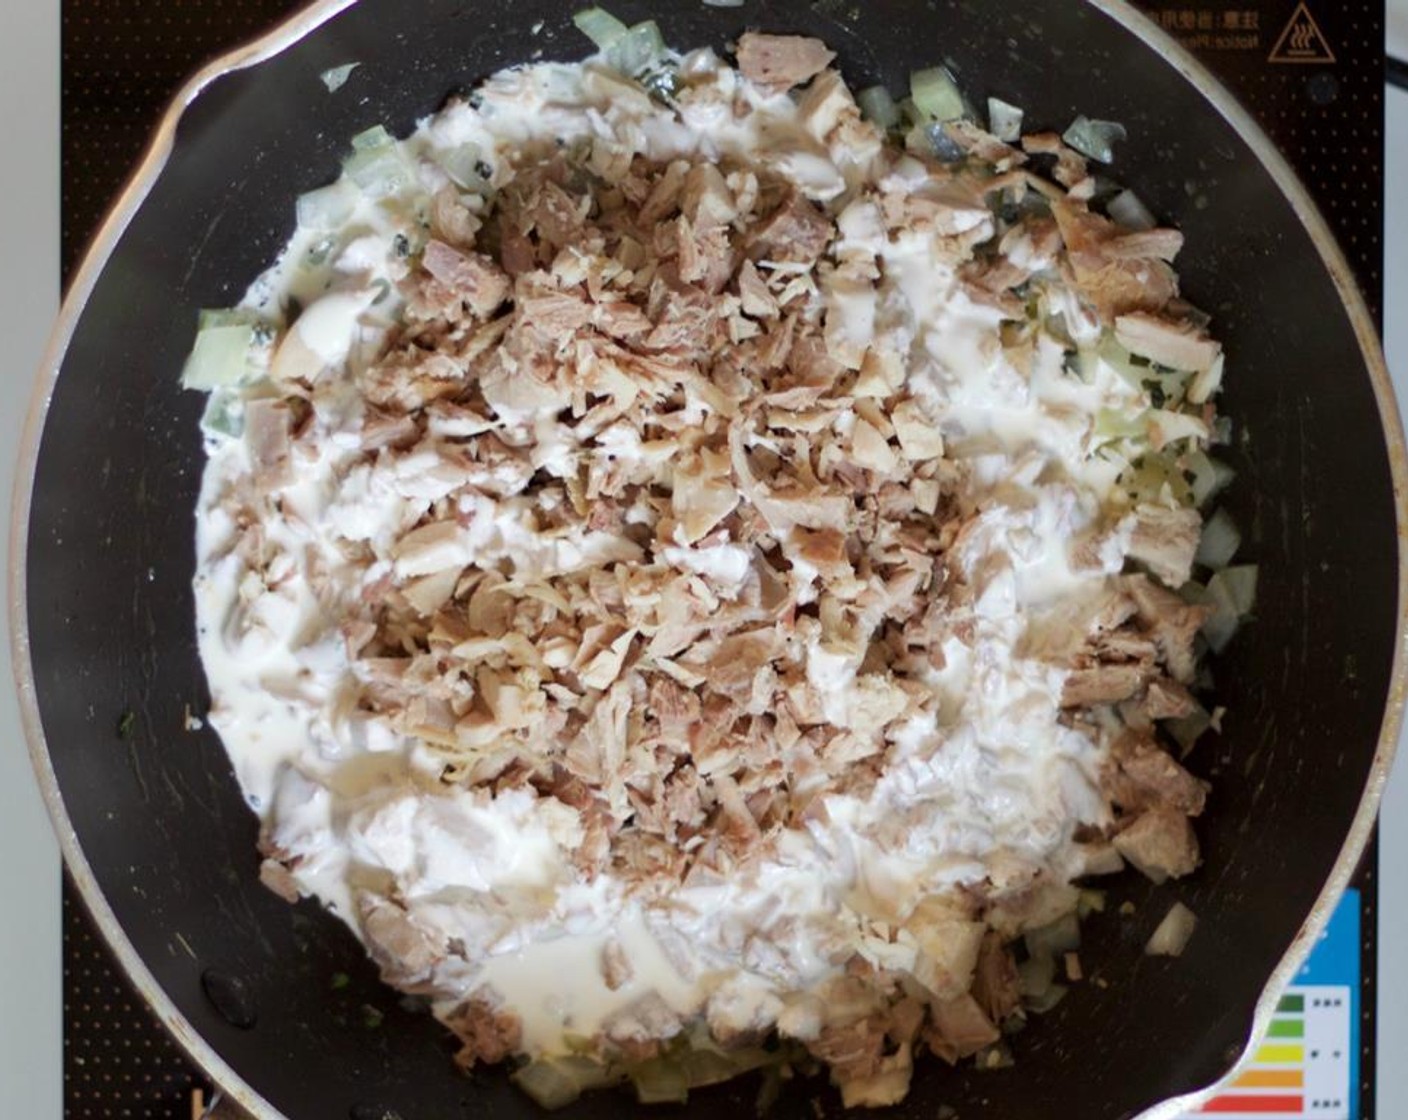 step 6 Add the chopped turkey and Heavy Cream (1/4 cup). Stir together and cook until the liquid evaporates.